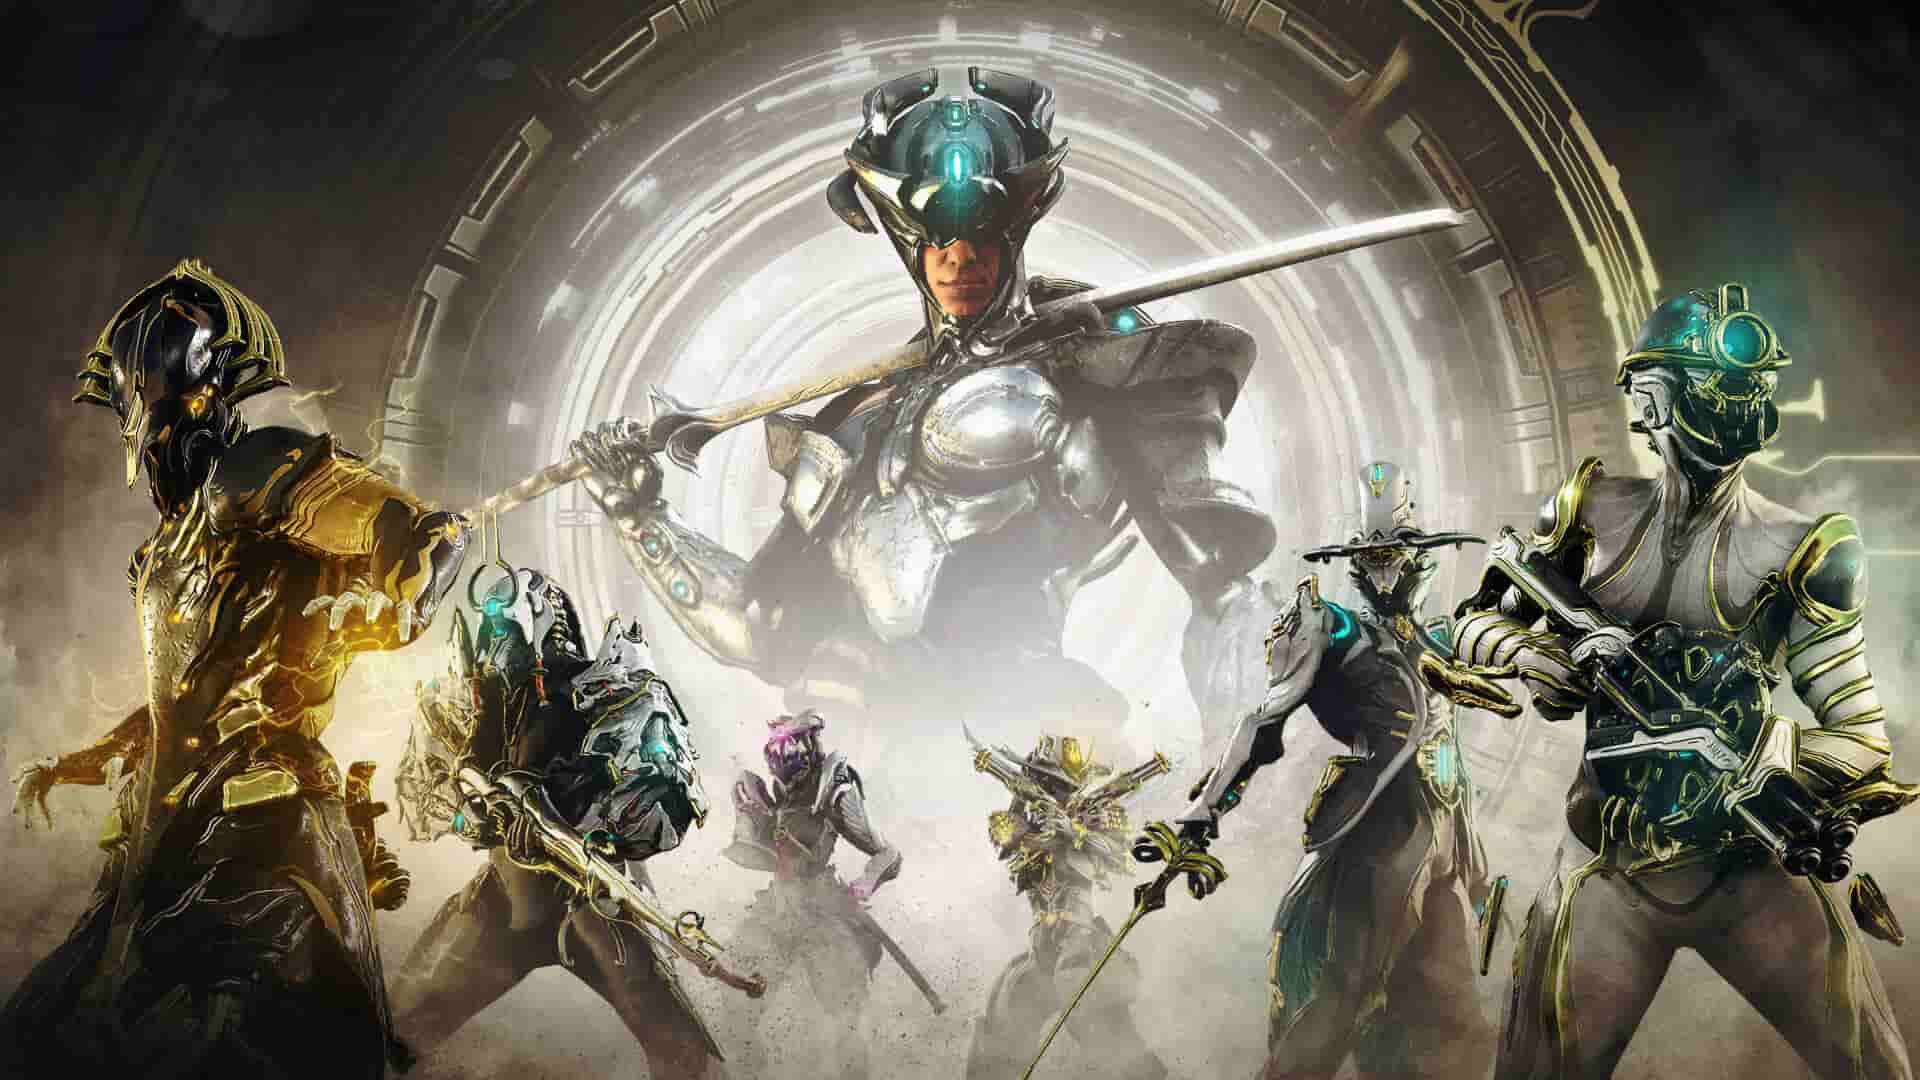 How can I chat in Warframe? – WARFRAME Support